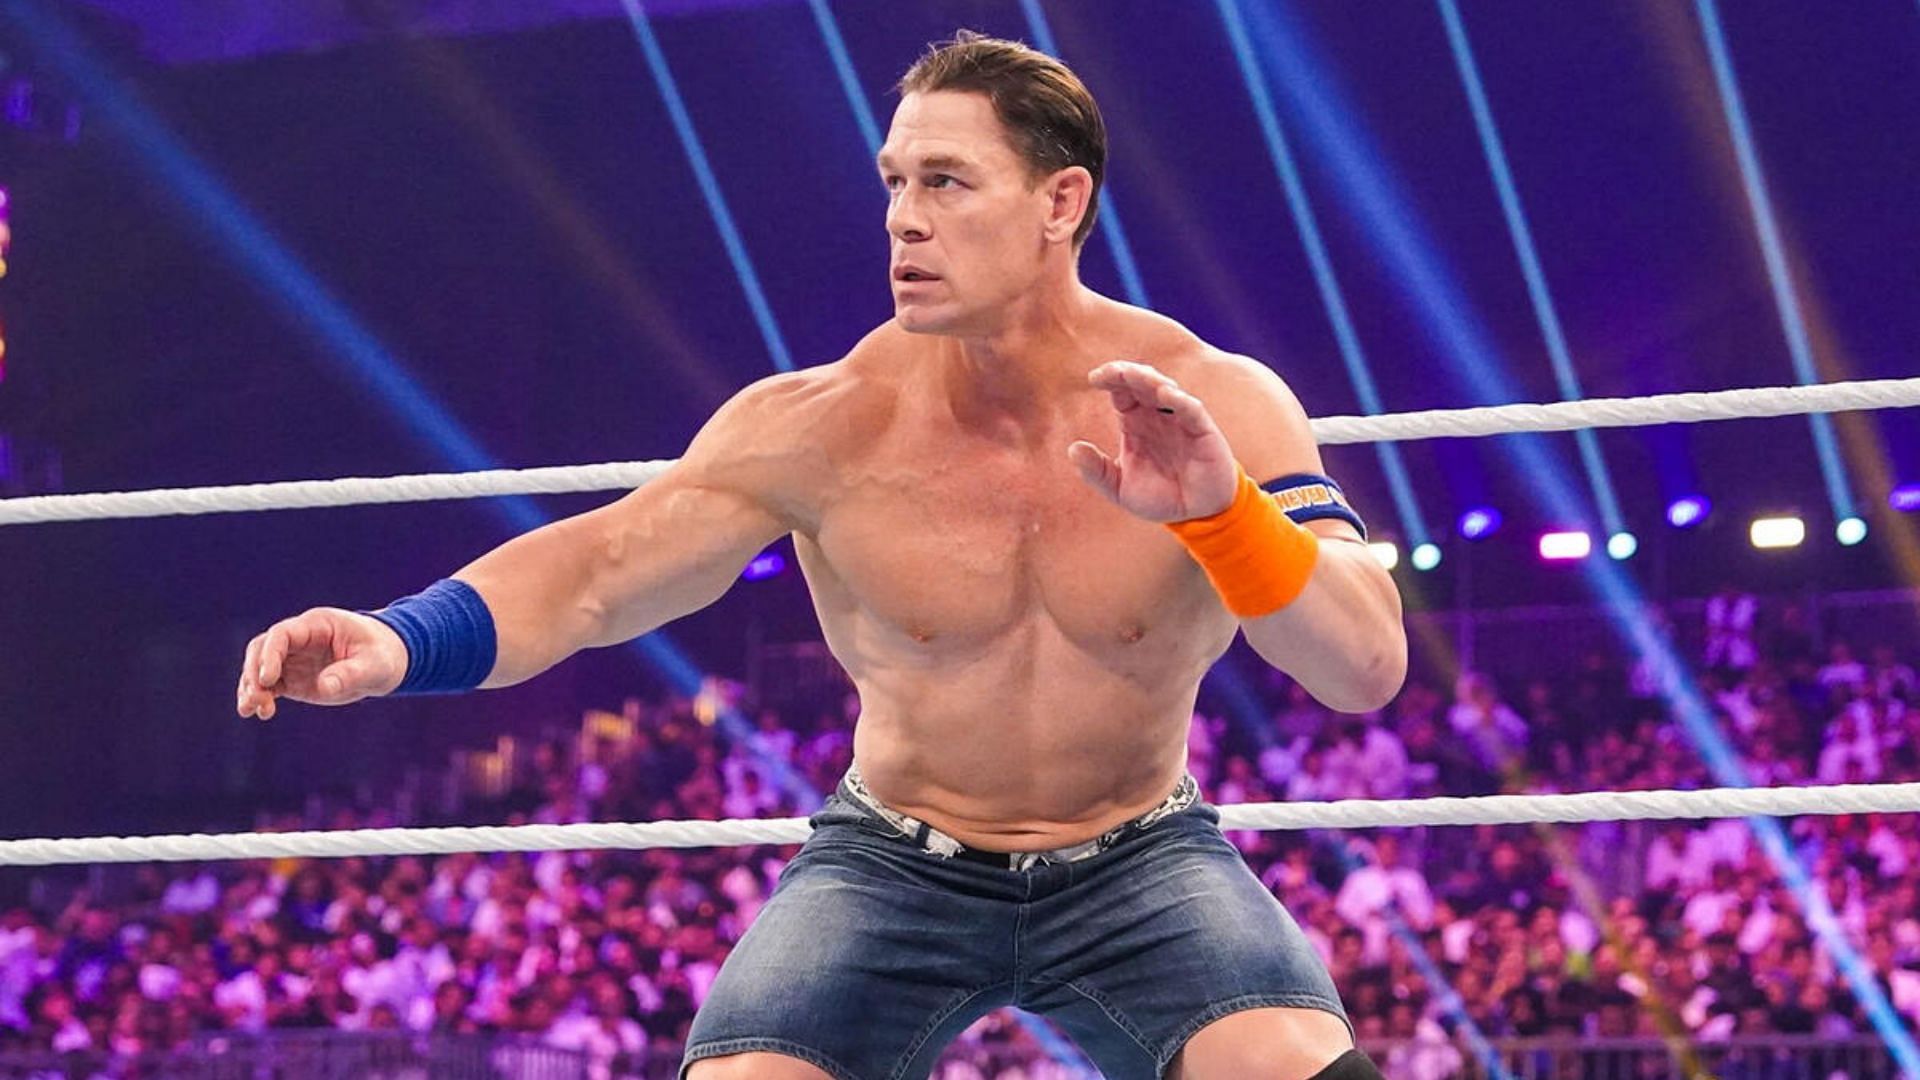 John Cena recently commented on the Vince McMahon controversy